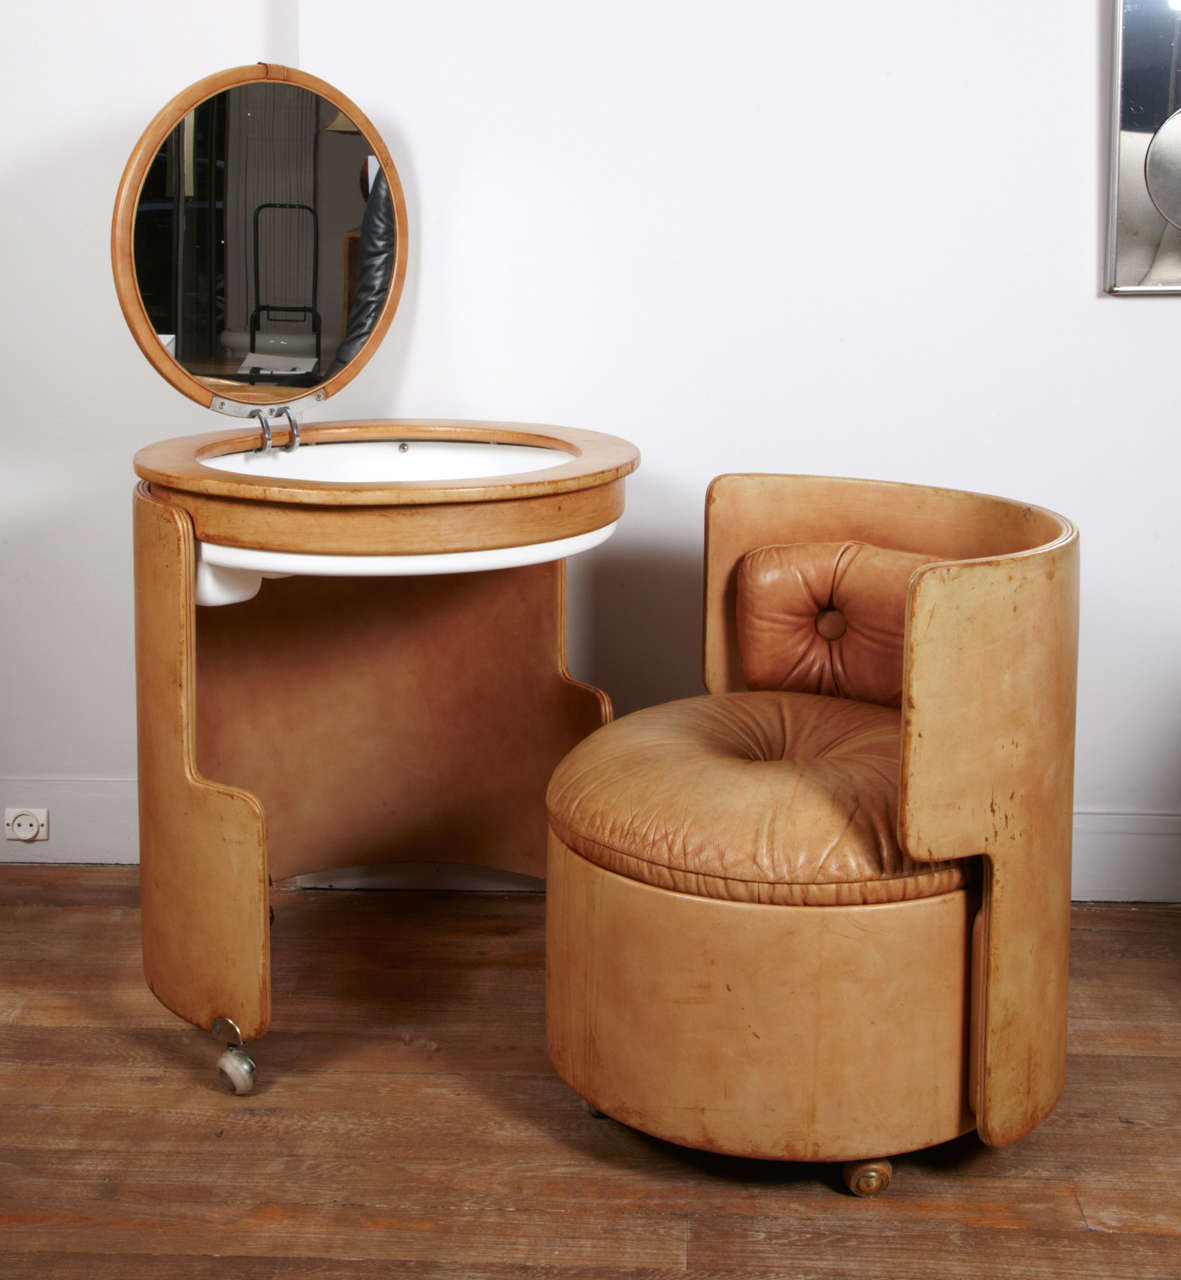 A cylindrical vanity and chair ,both entirely upholstered with leather , When closed,the seat fits nicely under the vanity to form  a gueridon .
Reproduced : G. Gramigna, « 1950/1980 Repertorio », Éditions Arnoldo Mondadori, Milan, 1985.